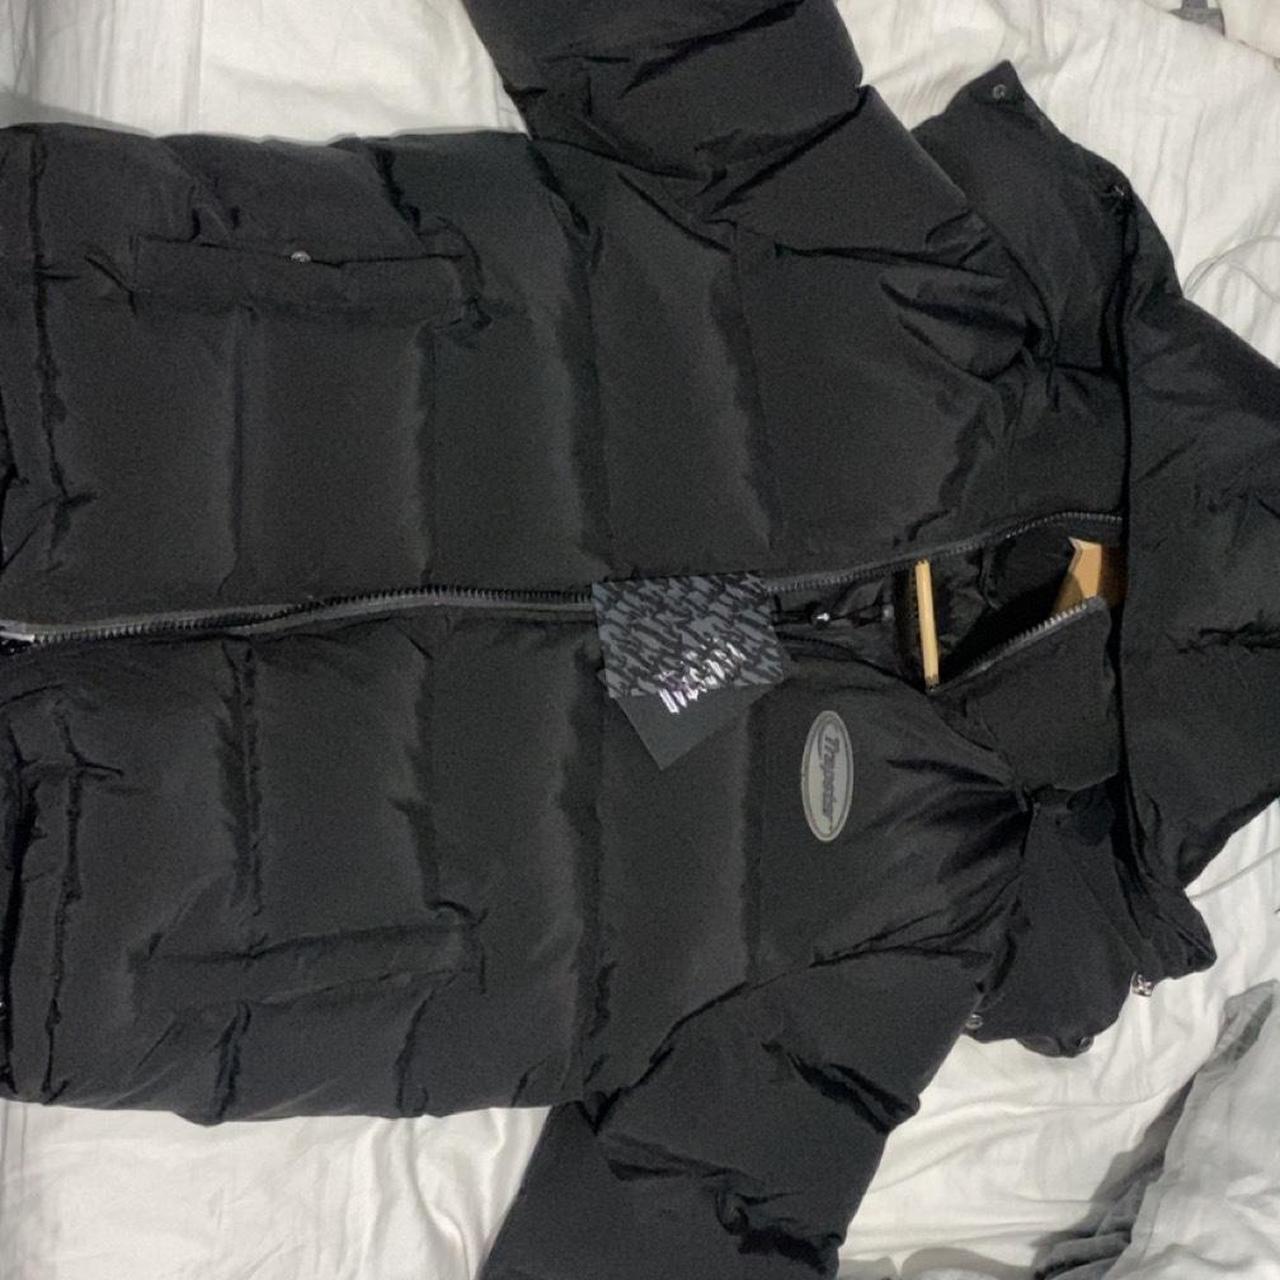 trapstar coat size M tags on slightly used - Depop